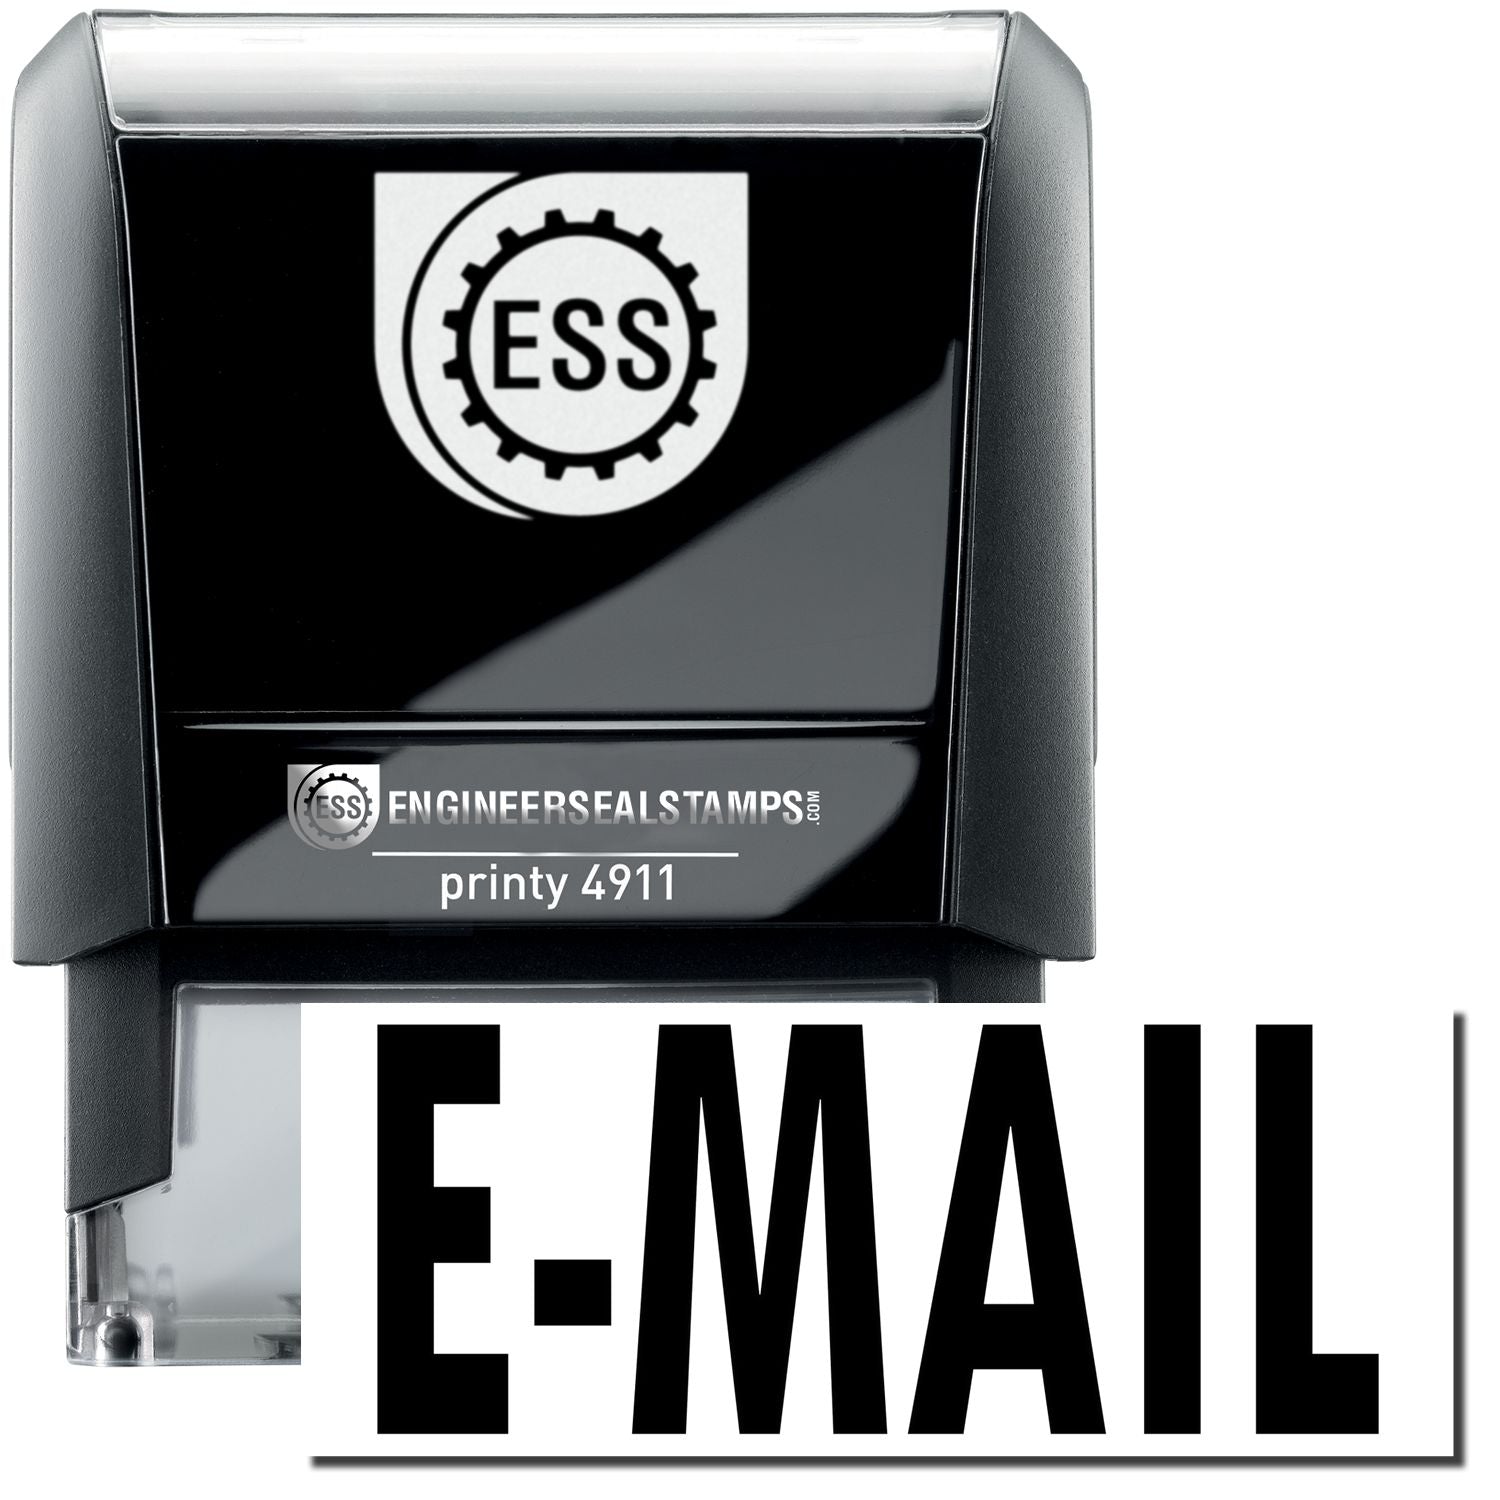 A self-inking stamp with a stamped image showing how the text "E-MAIL" is displayed after stamping.